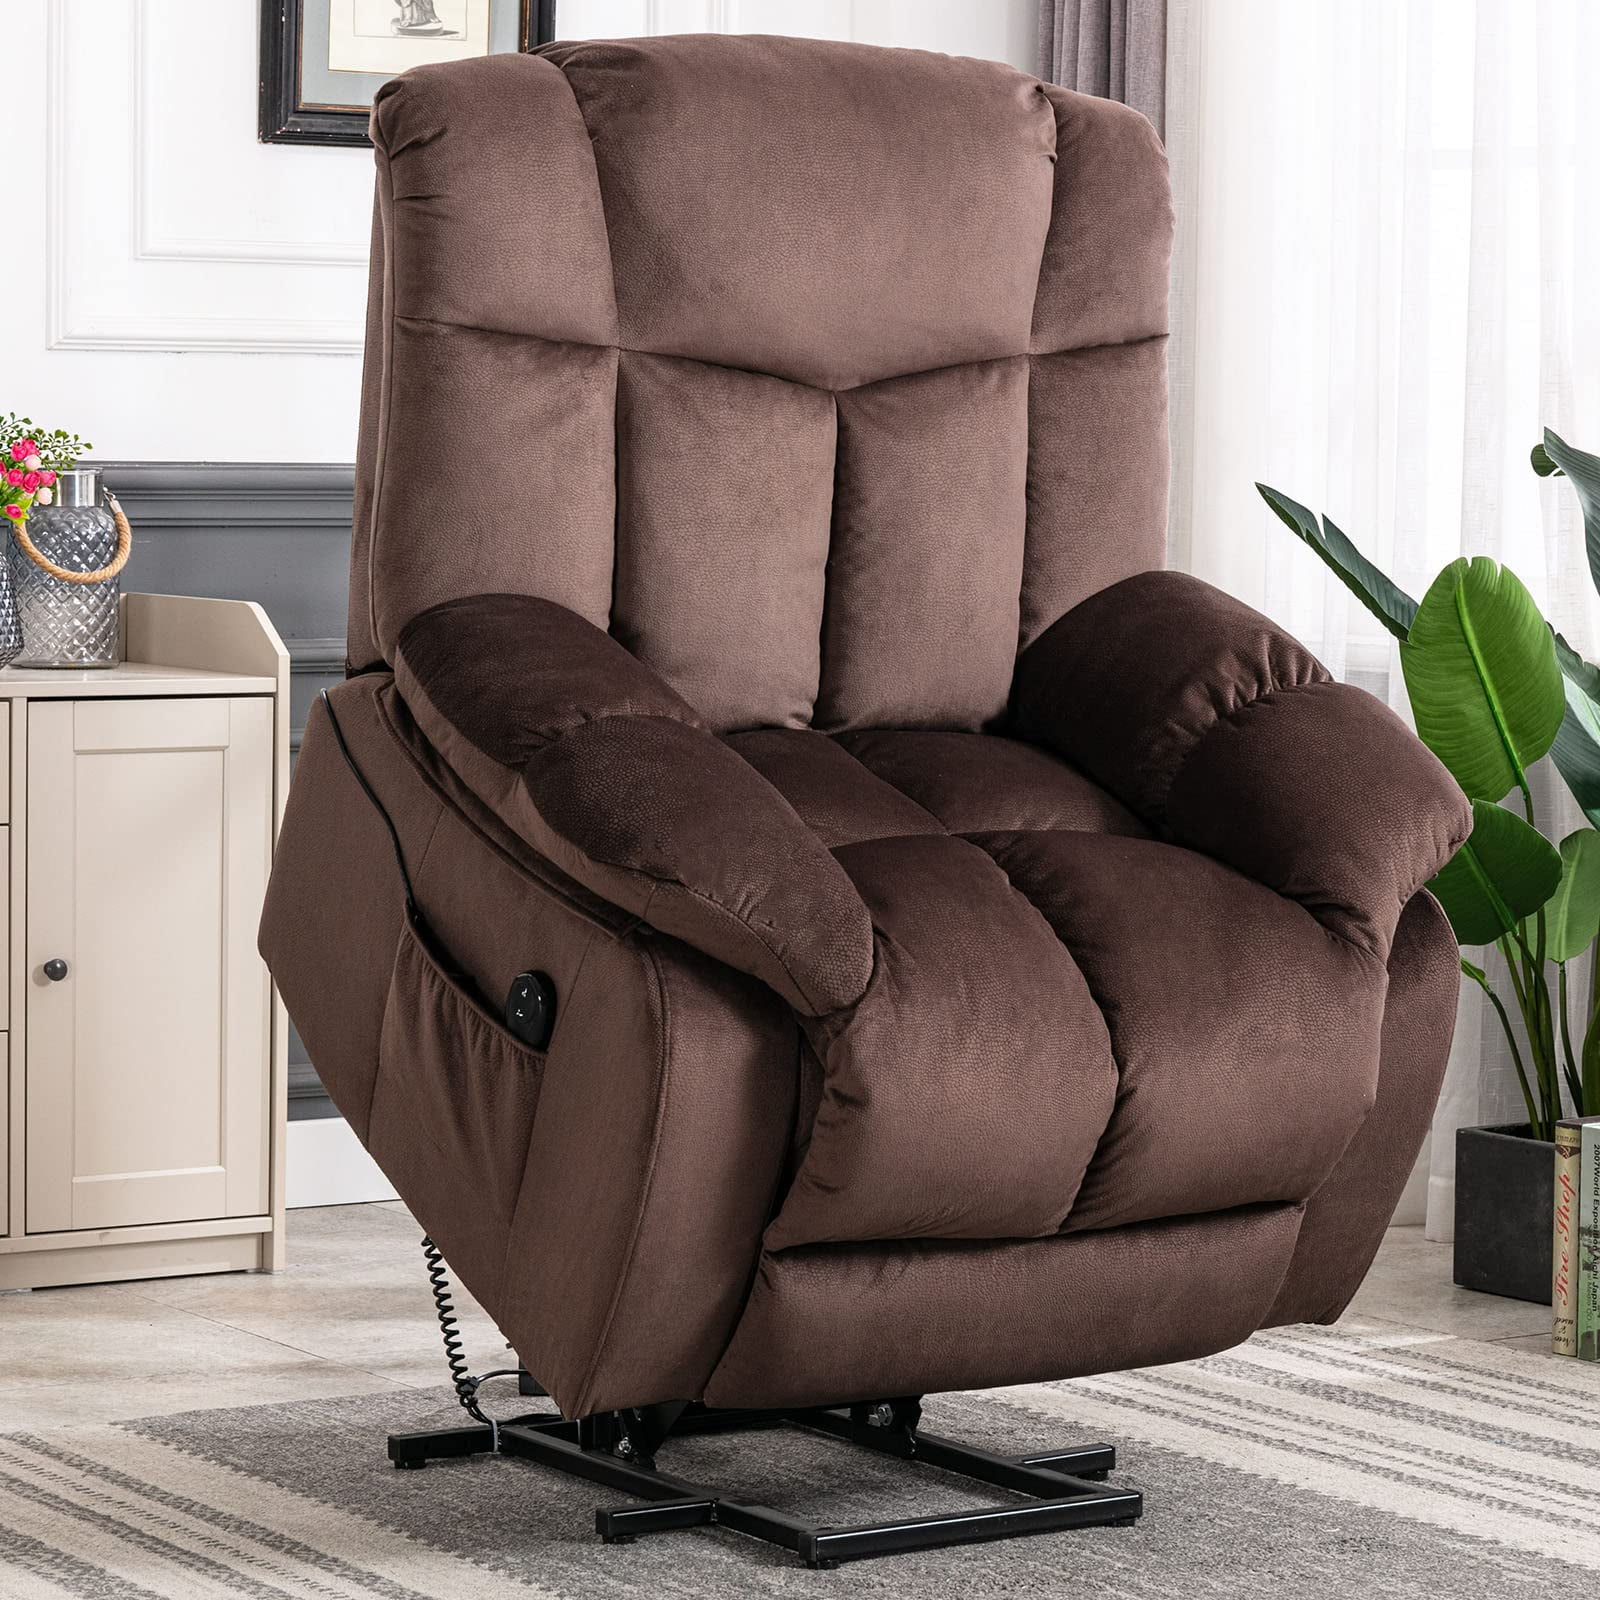 Recliner Cushion for Elderly Extra Large Thick Recliner Chair Seat